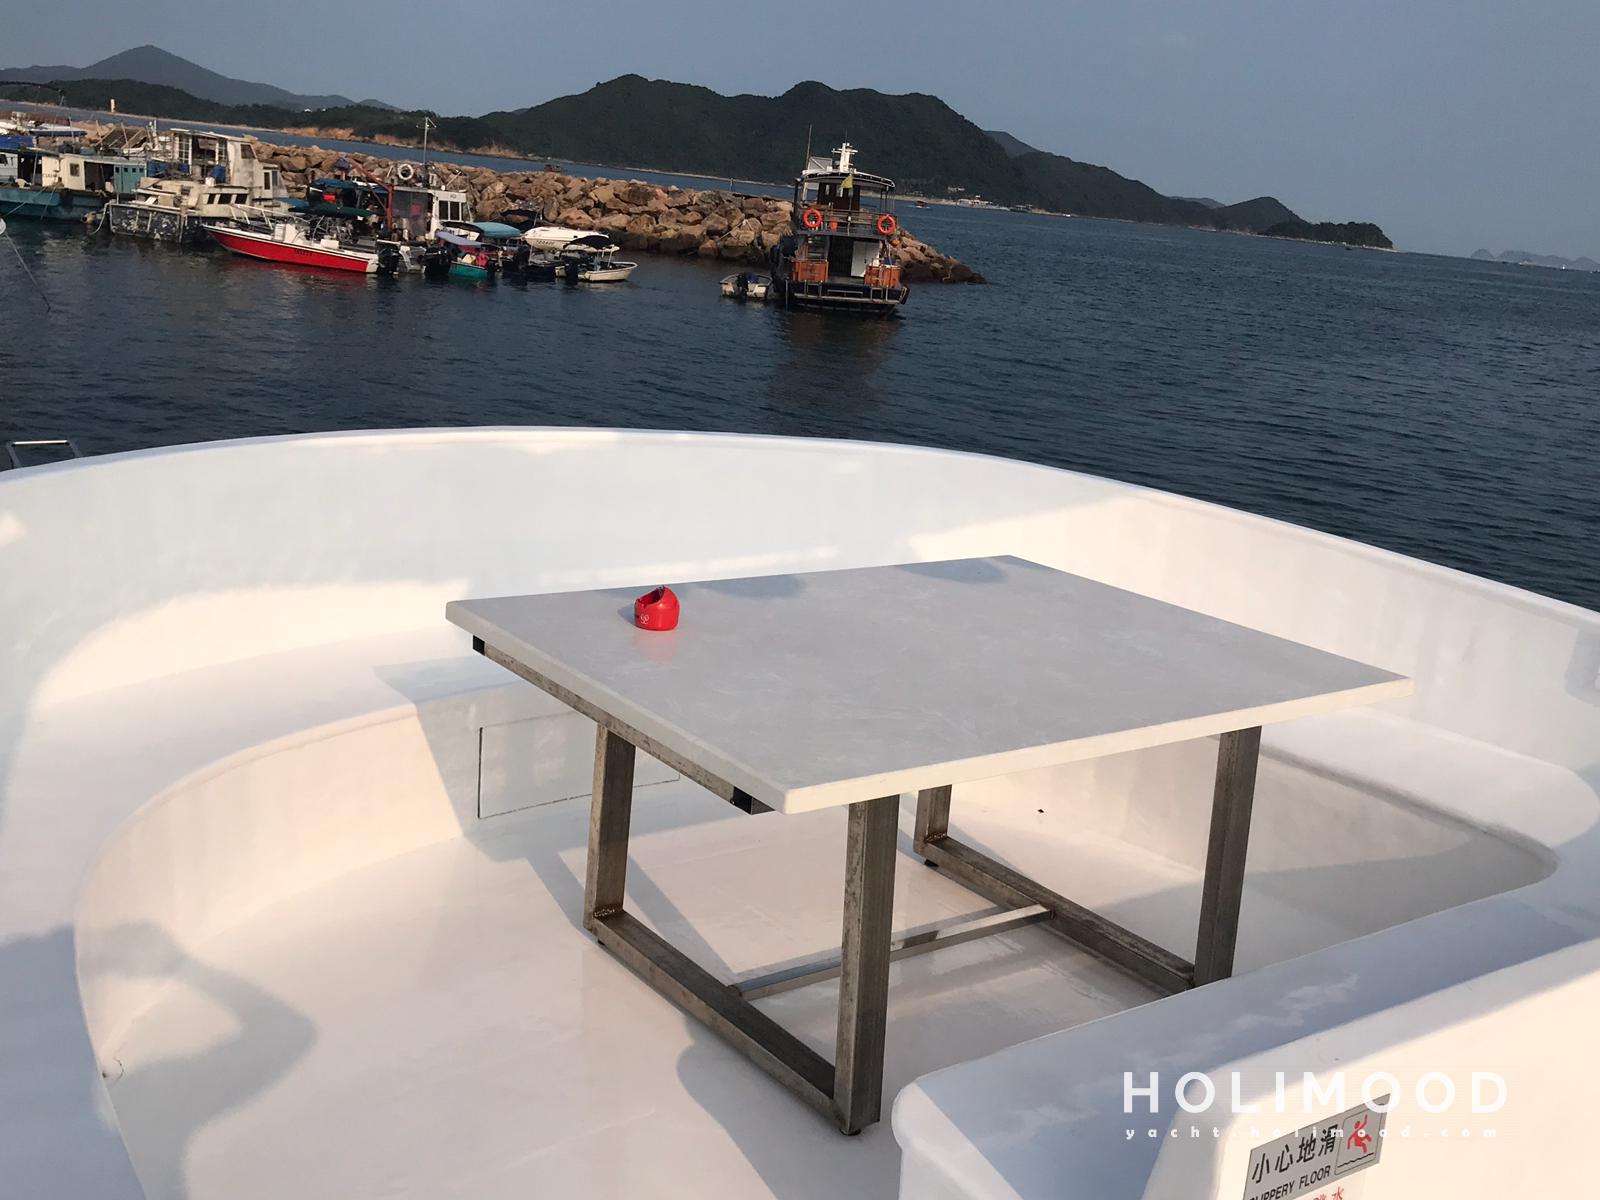 HG01 Sai Kung All-inclusive Boat Trip (Free lunch, Crab Congee, Professional Wakeboard and latest water toys) 8